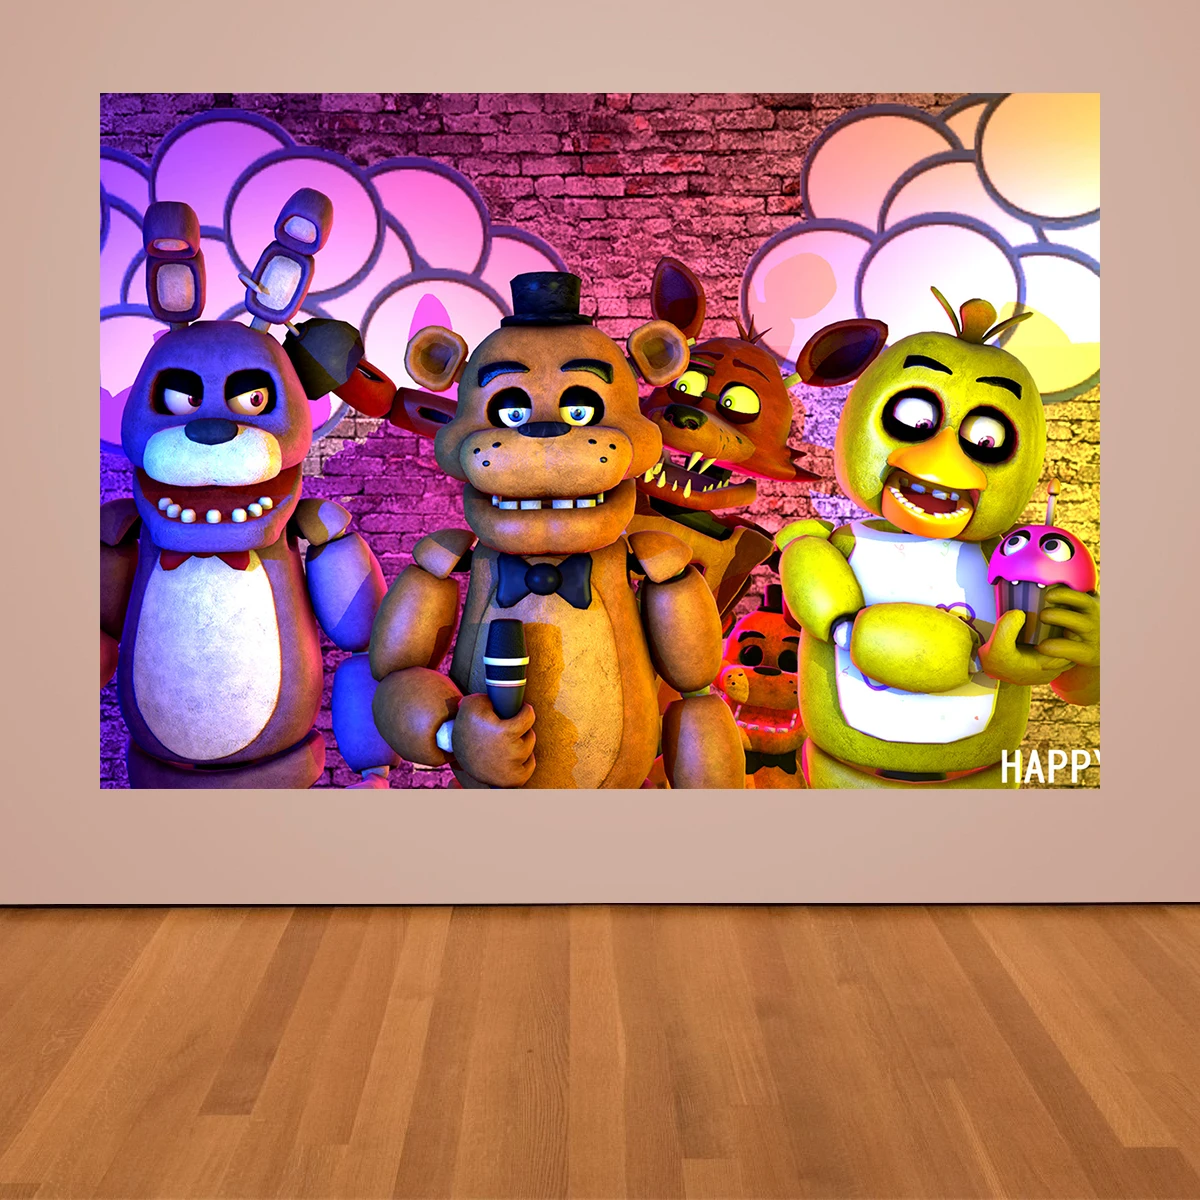 Five Night Happy Birthday Party Decorations Game Banner Cake